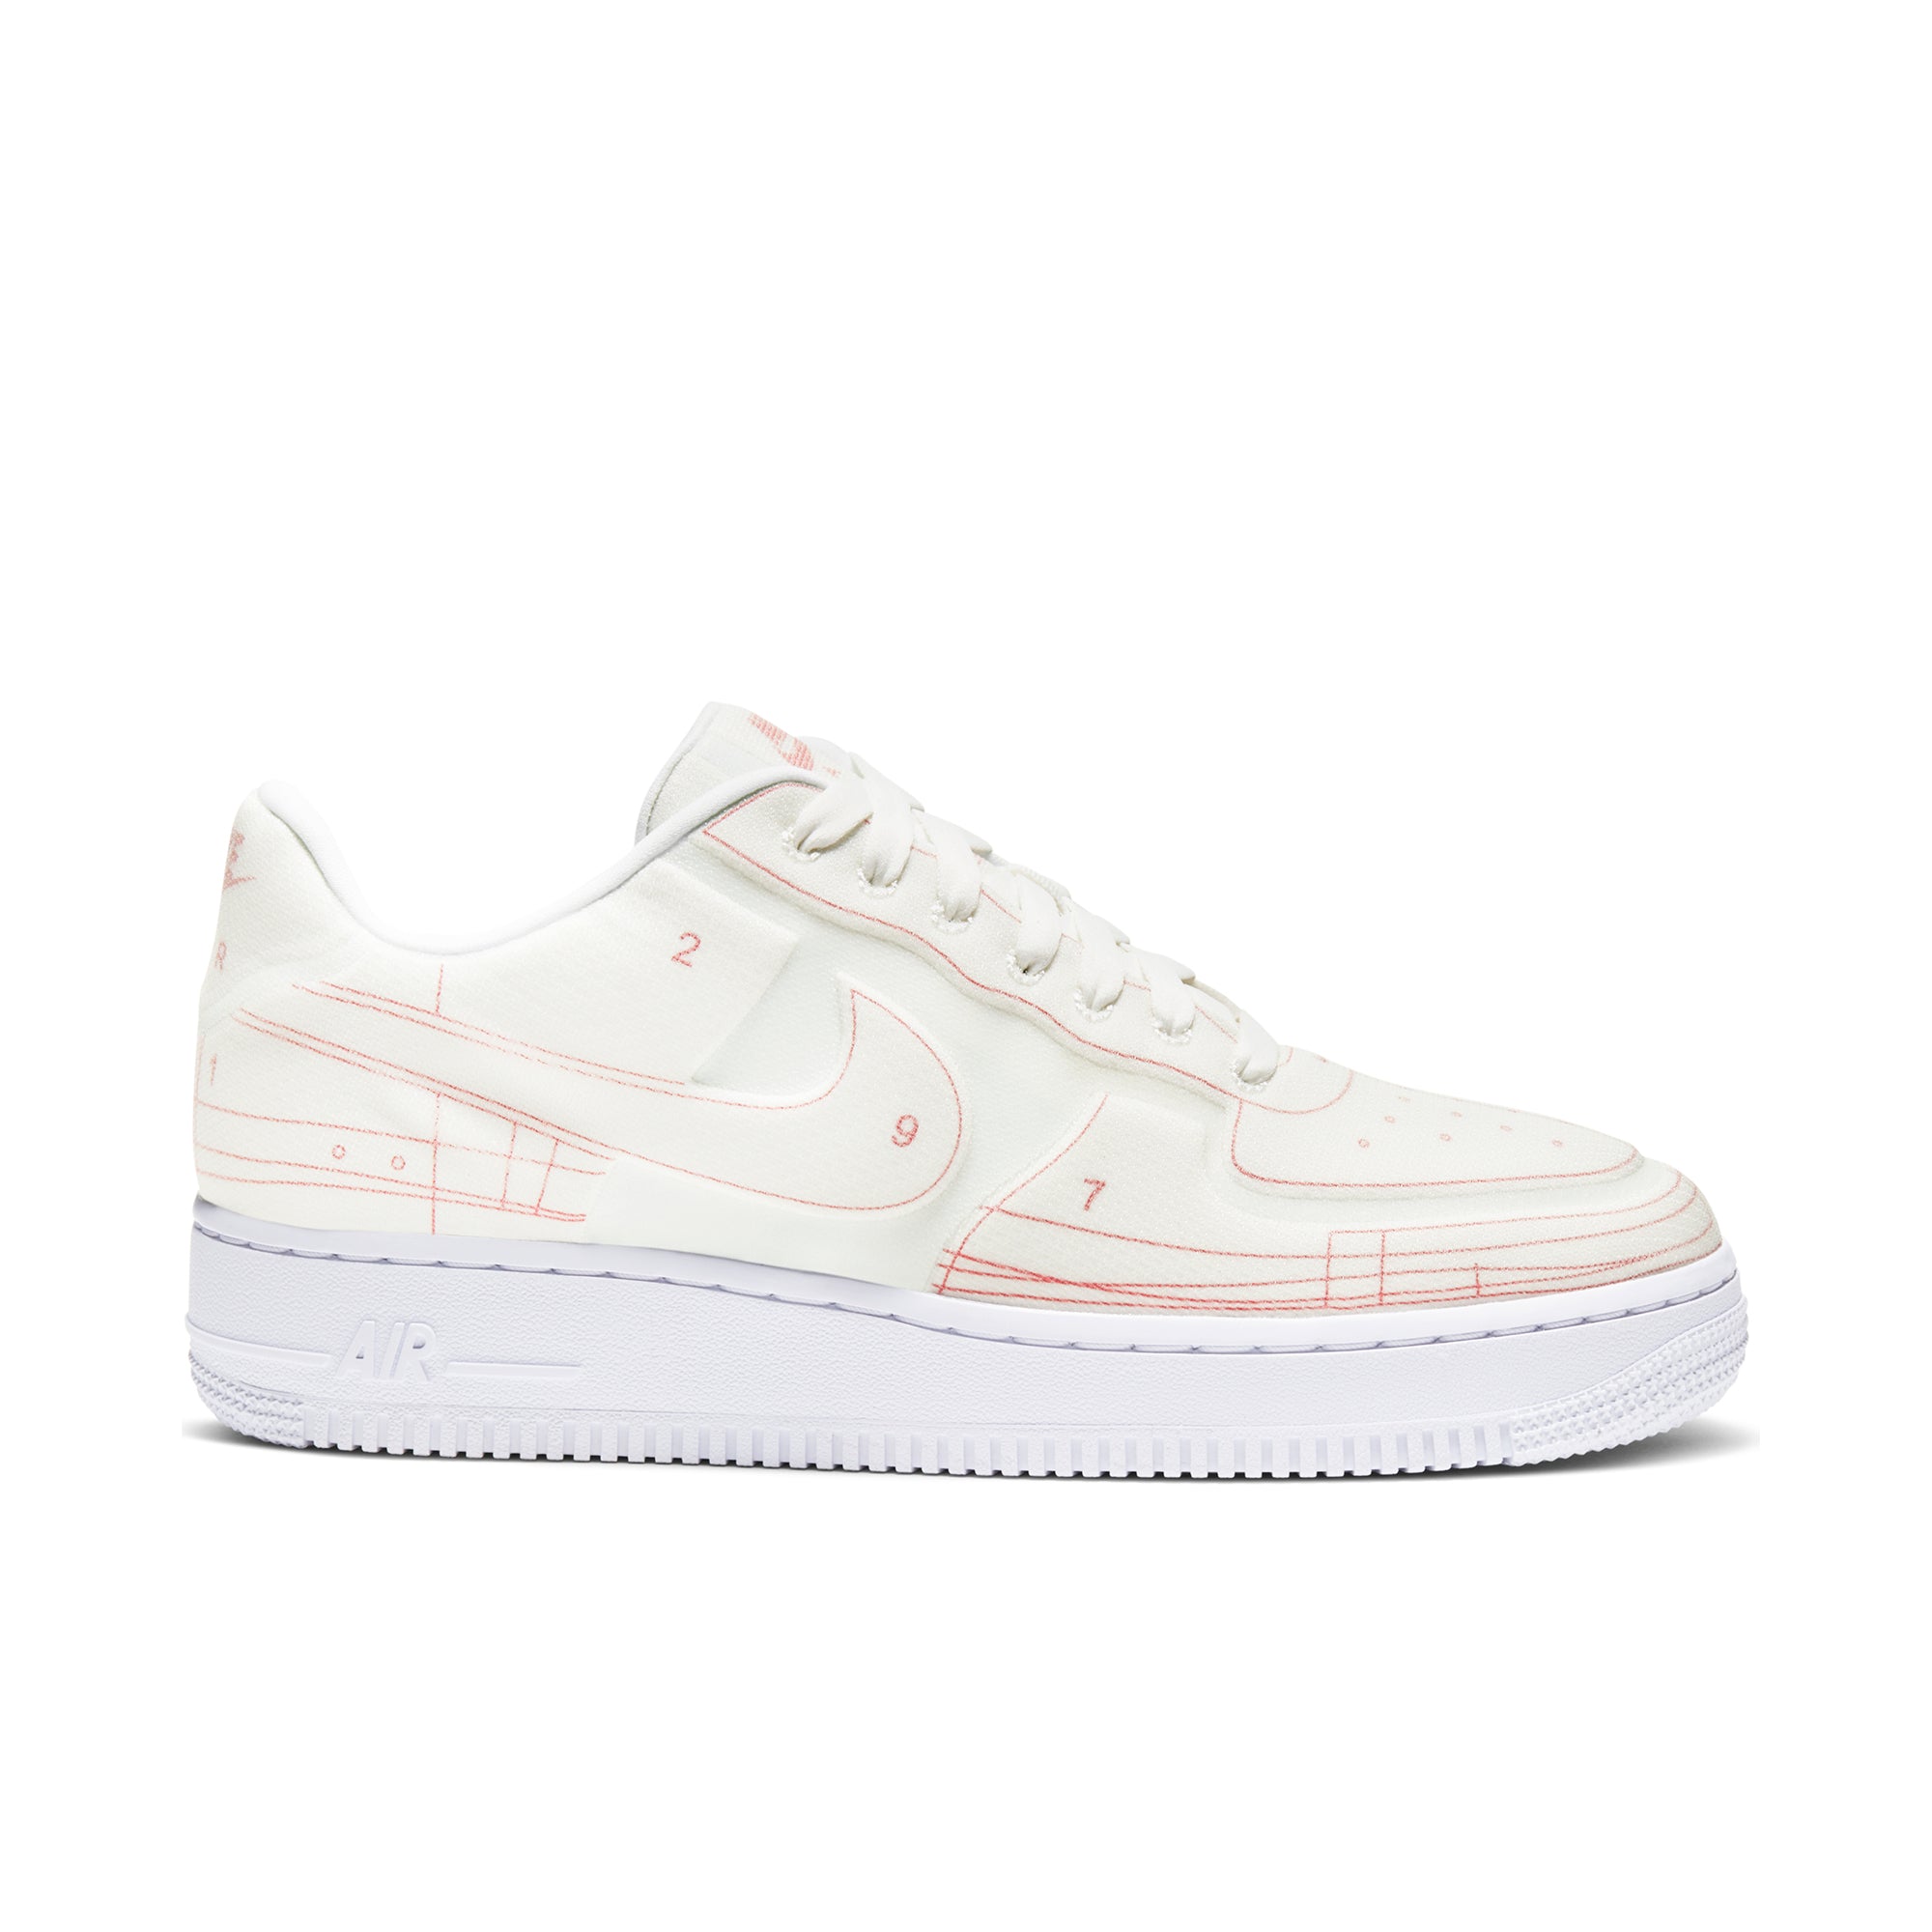 nike air force 1 low white and black Nike Air Force 1 Low '07 LX Blueprint Summit White (W)